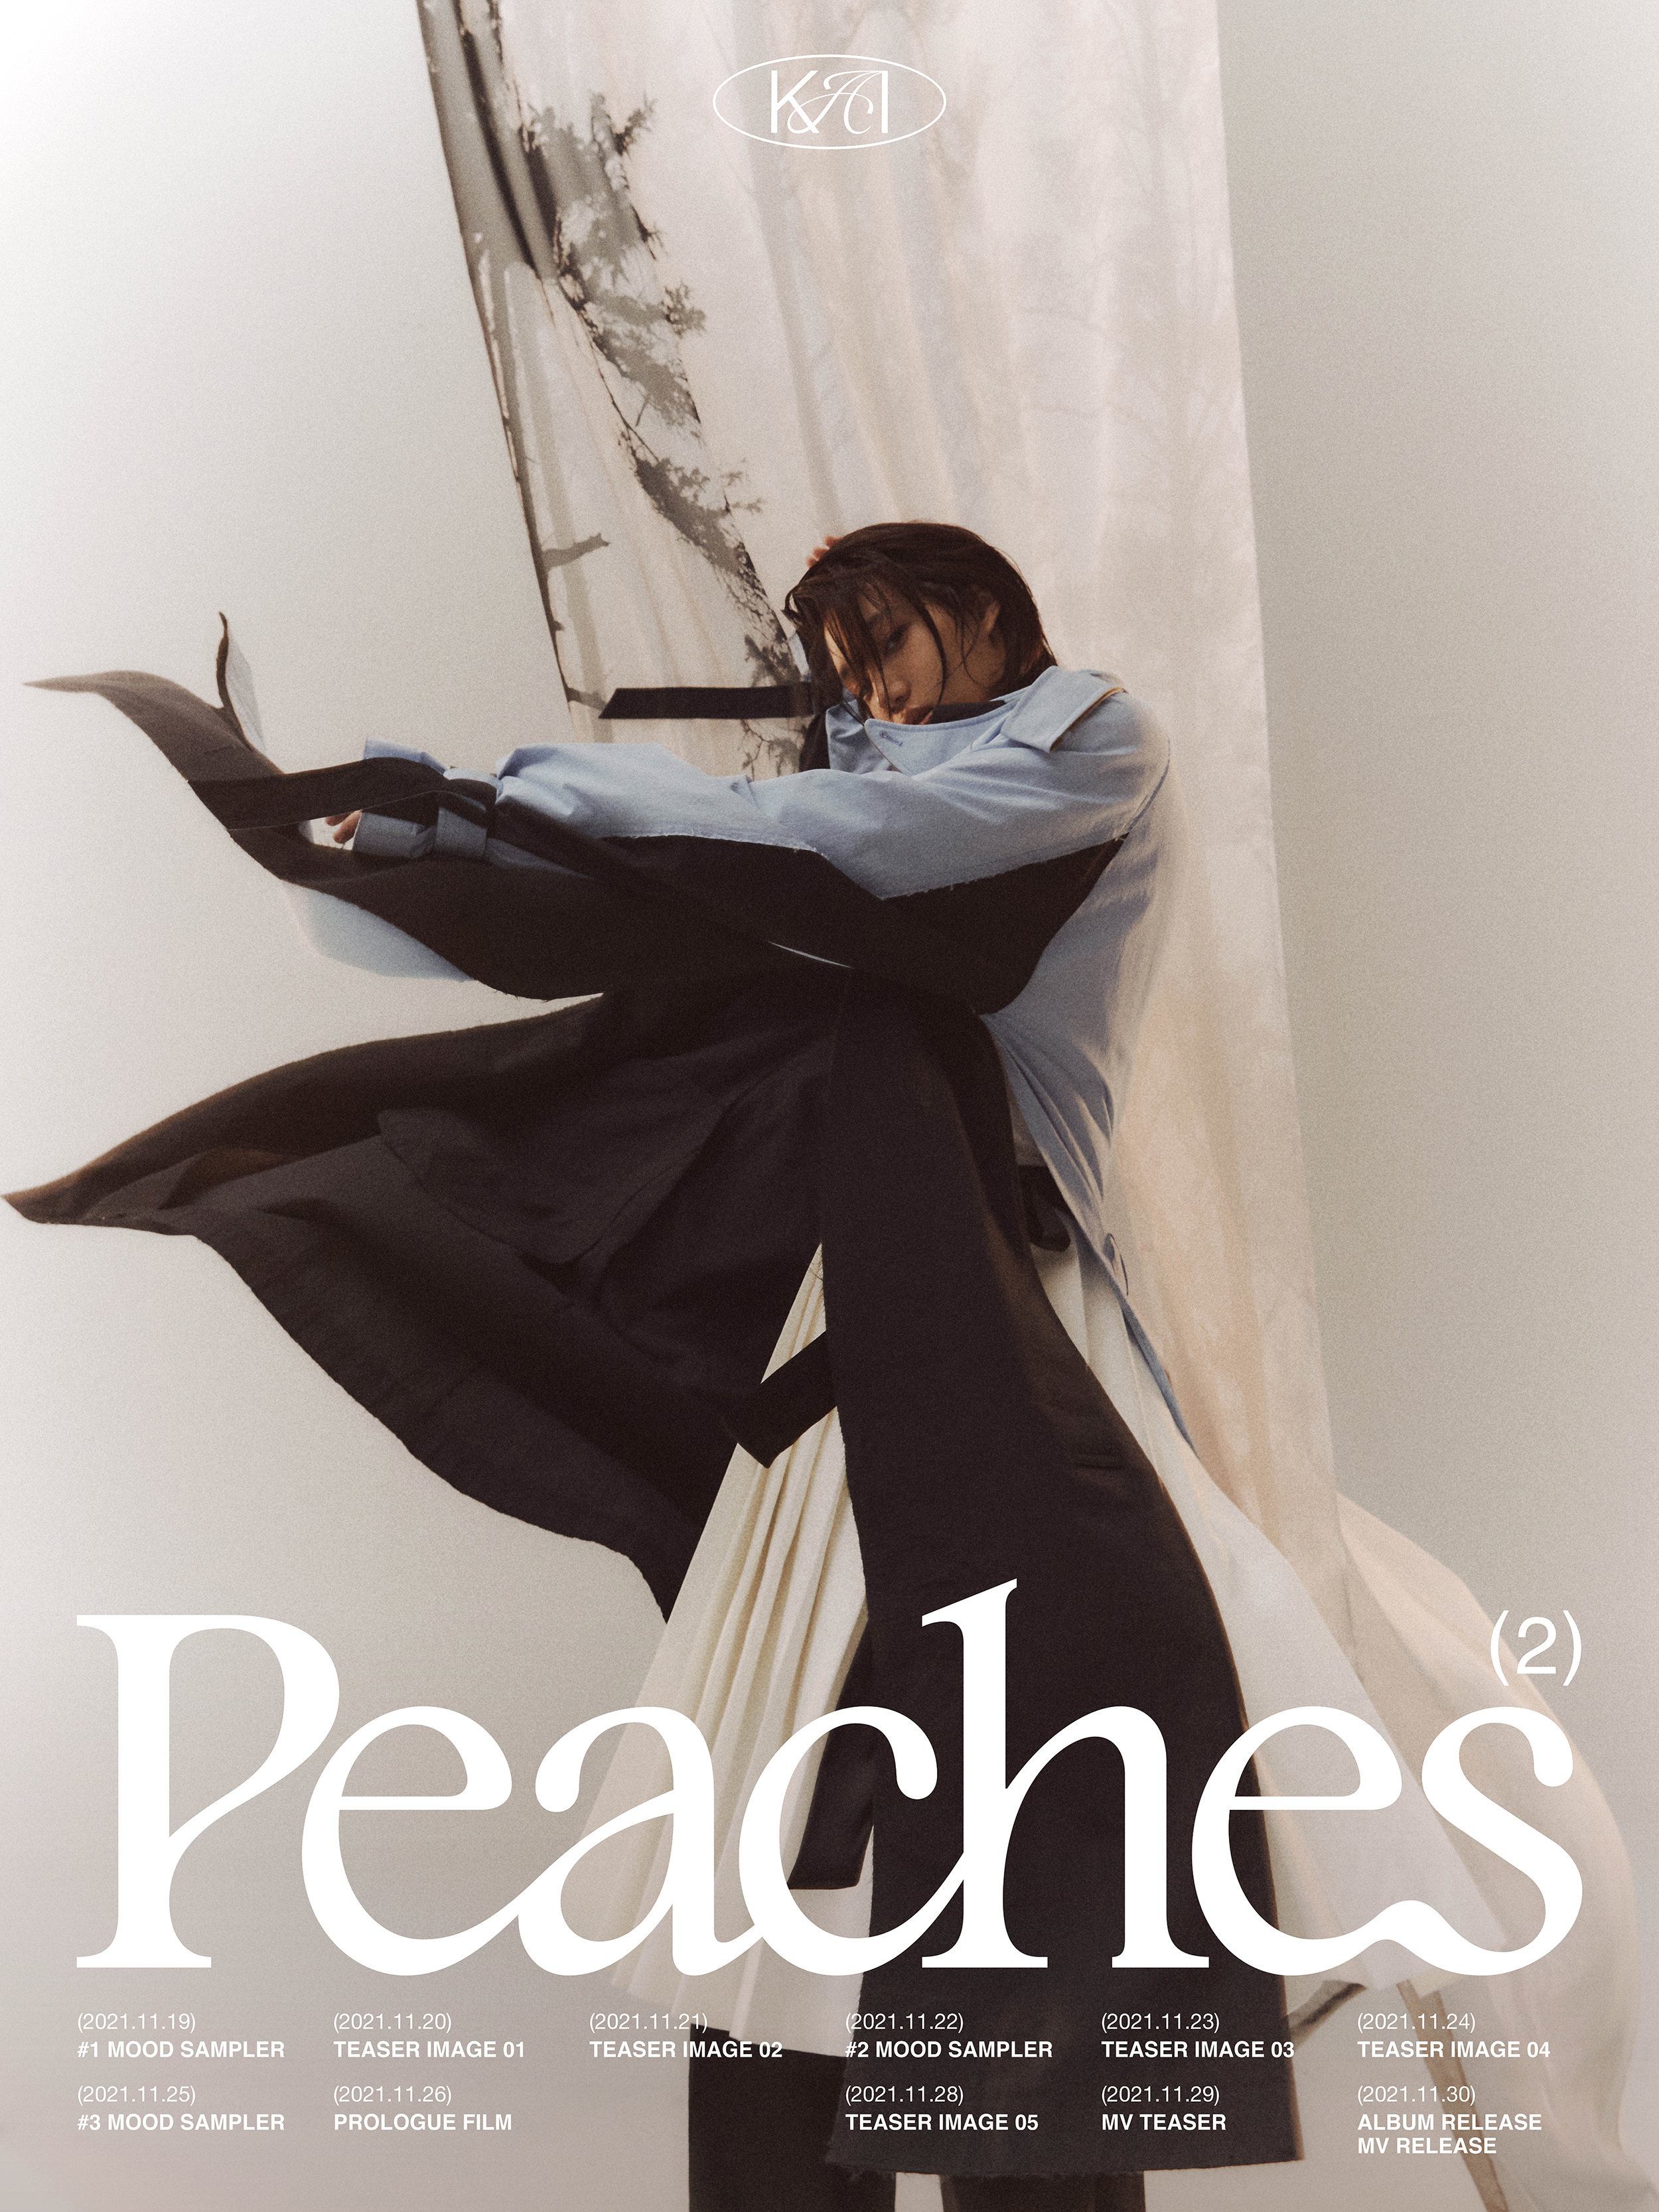 EXO's Kai is a painting in 'Peaches' teaser images